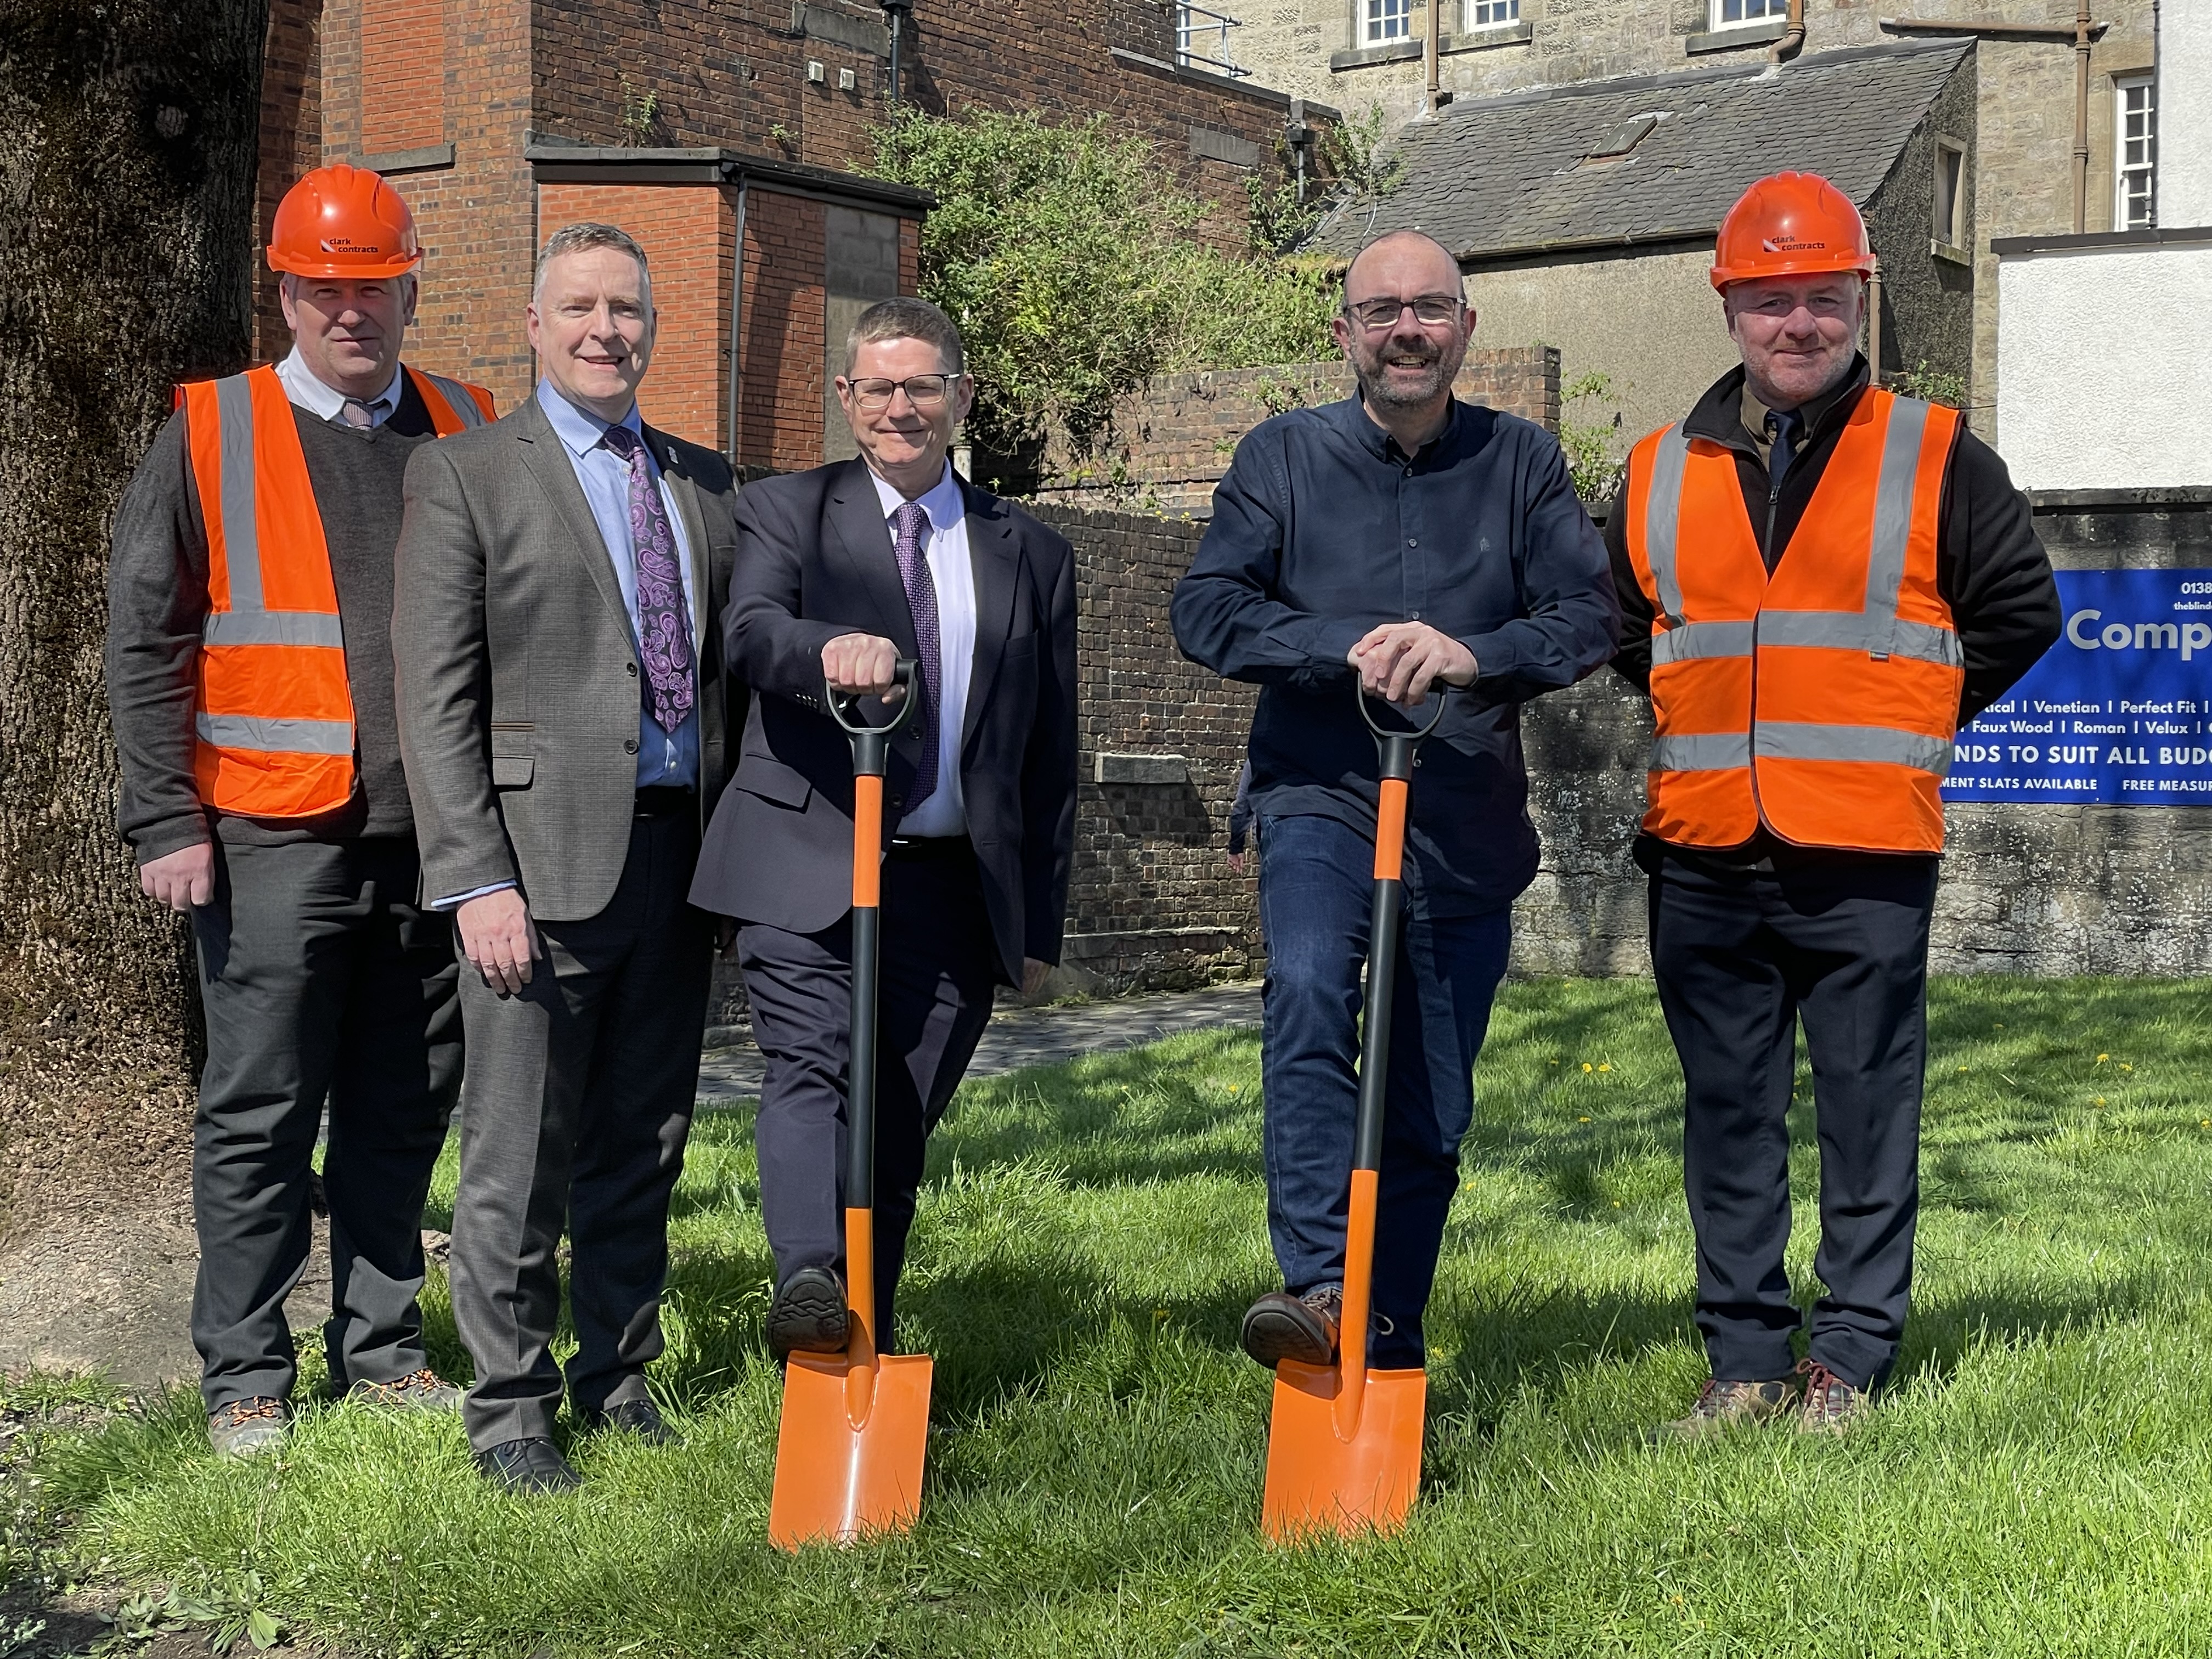 Glencairn House site works begin - image of Chief executive Peter Hesset, Councillor Mcbride and Martin Rooney and workers